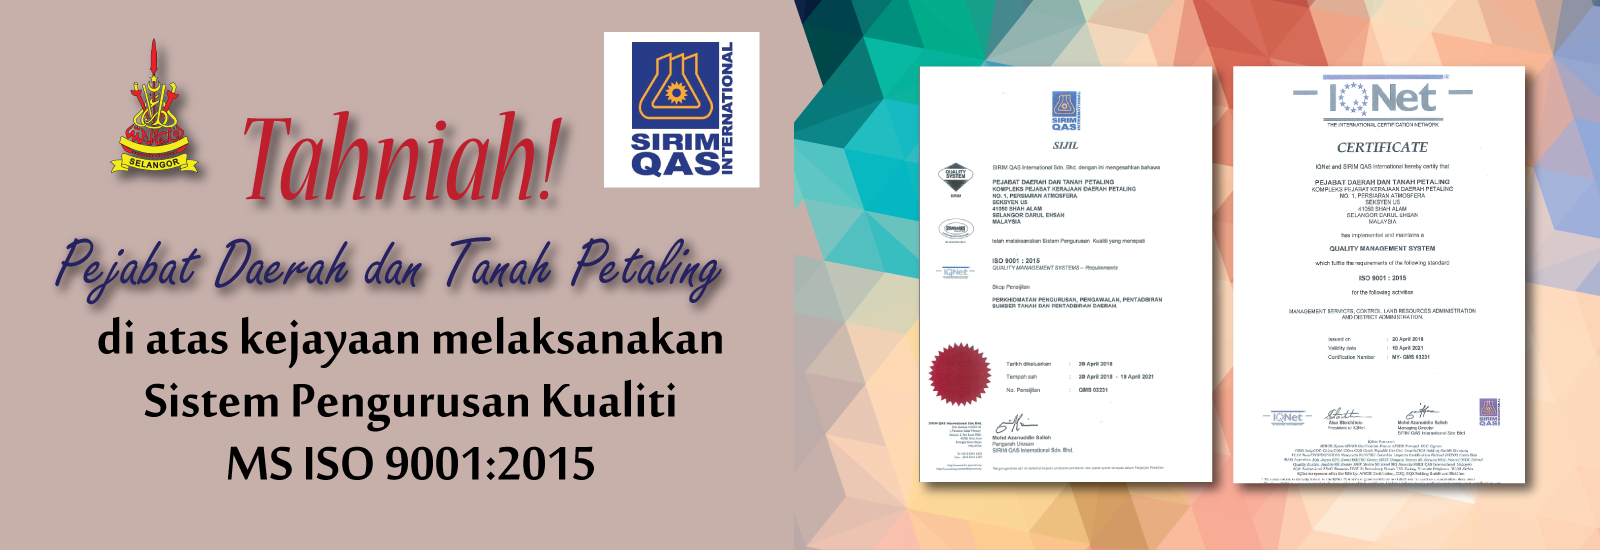 MS ISO 9001:2015